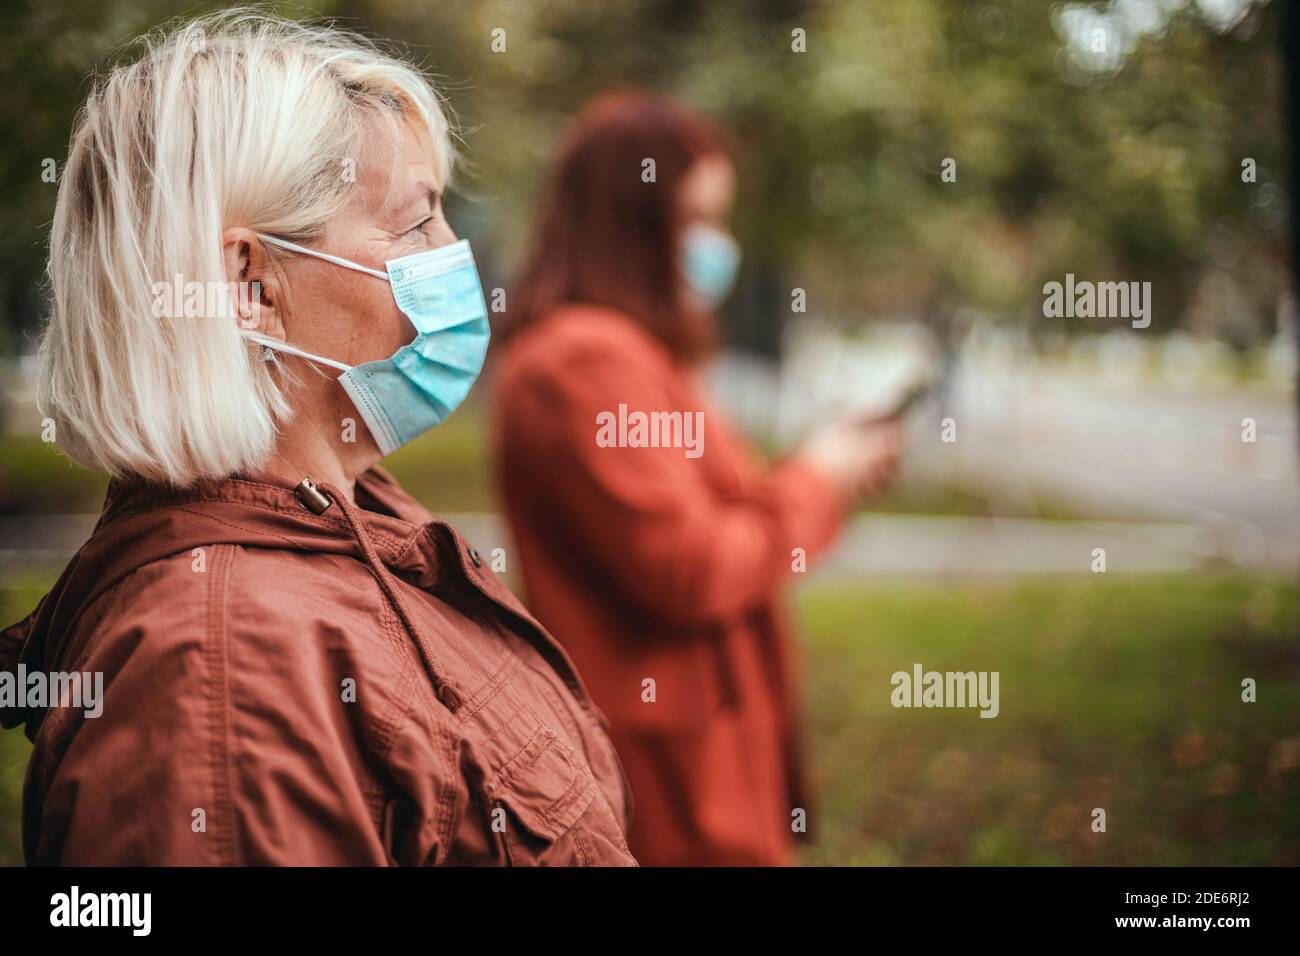 Coronavirus, Covid 19 epidemic. People wearing face mask outdoors in the autumn park. Girl uses a smartphone Stock Photo